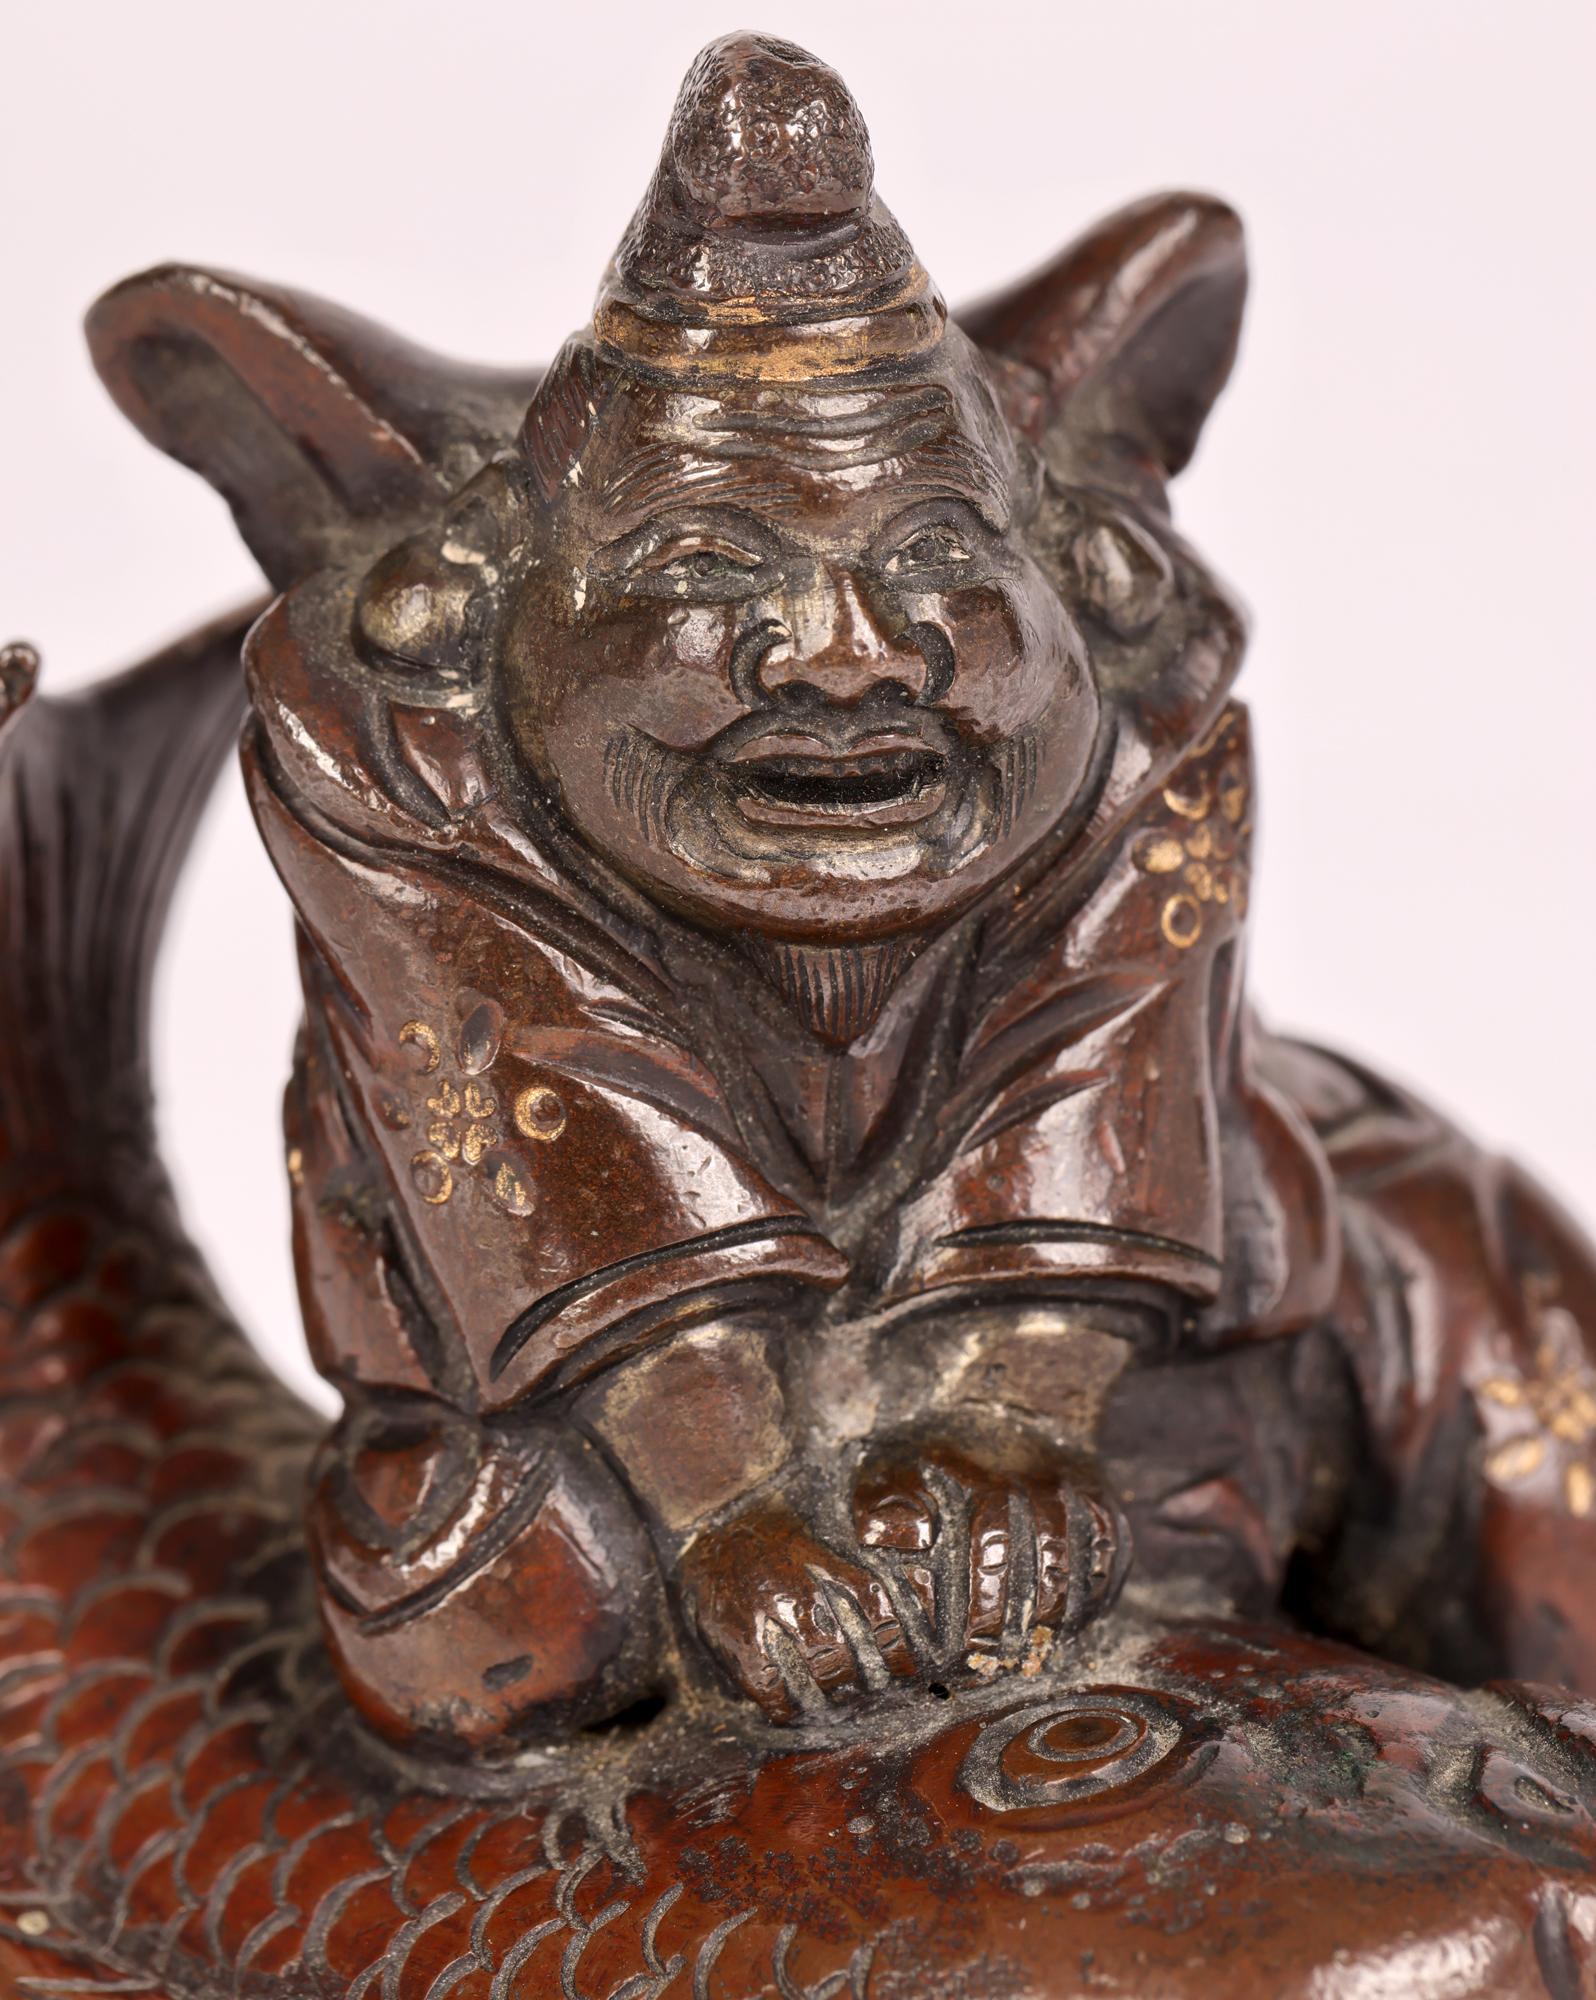 A delightful antique Japanese Meiji Bronze portrayal of a fisherman dating from the 19th century. The fisherman is portrayed with a very large fish and sitting on it to hold it down. The figure is well detailed with gilt patterning and with